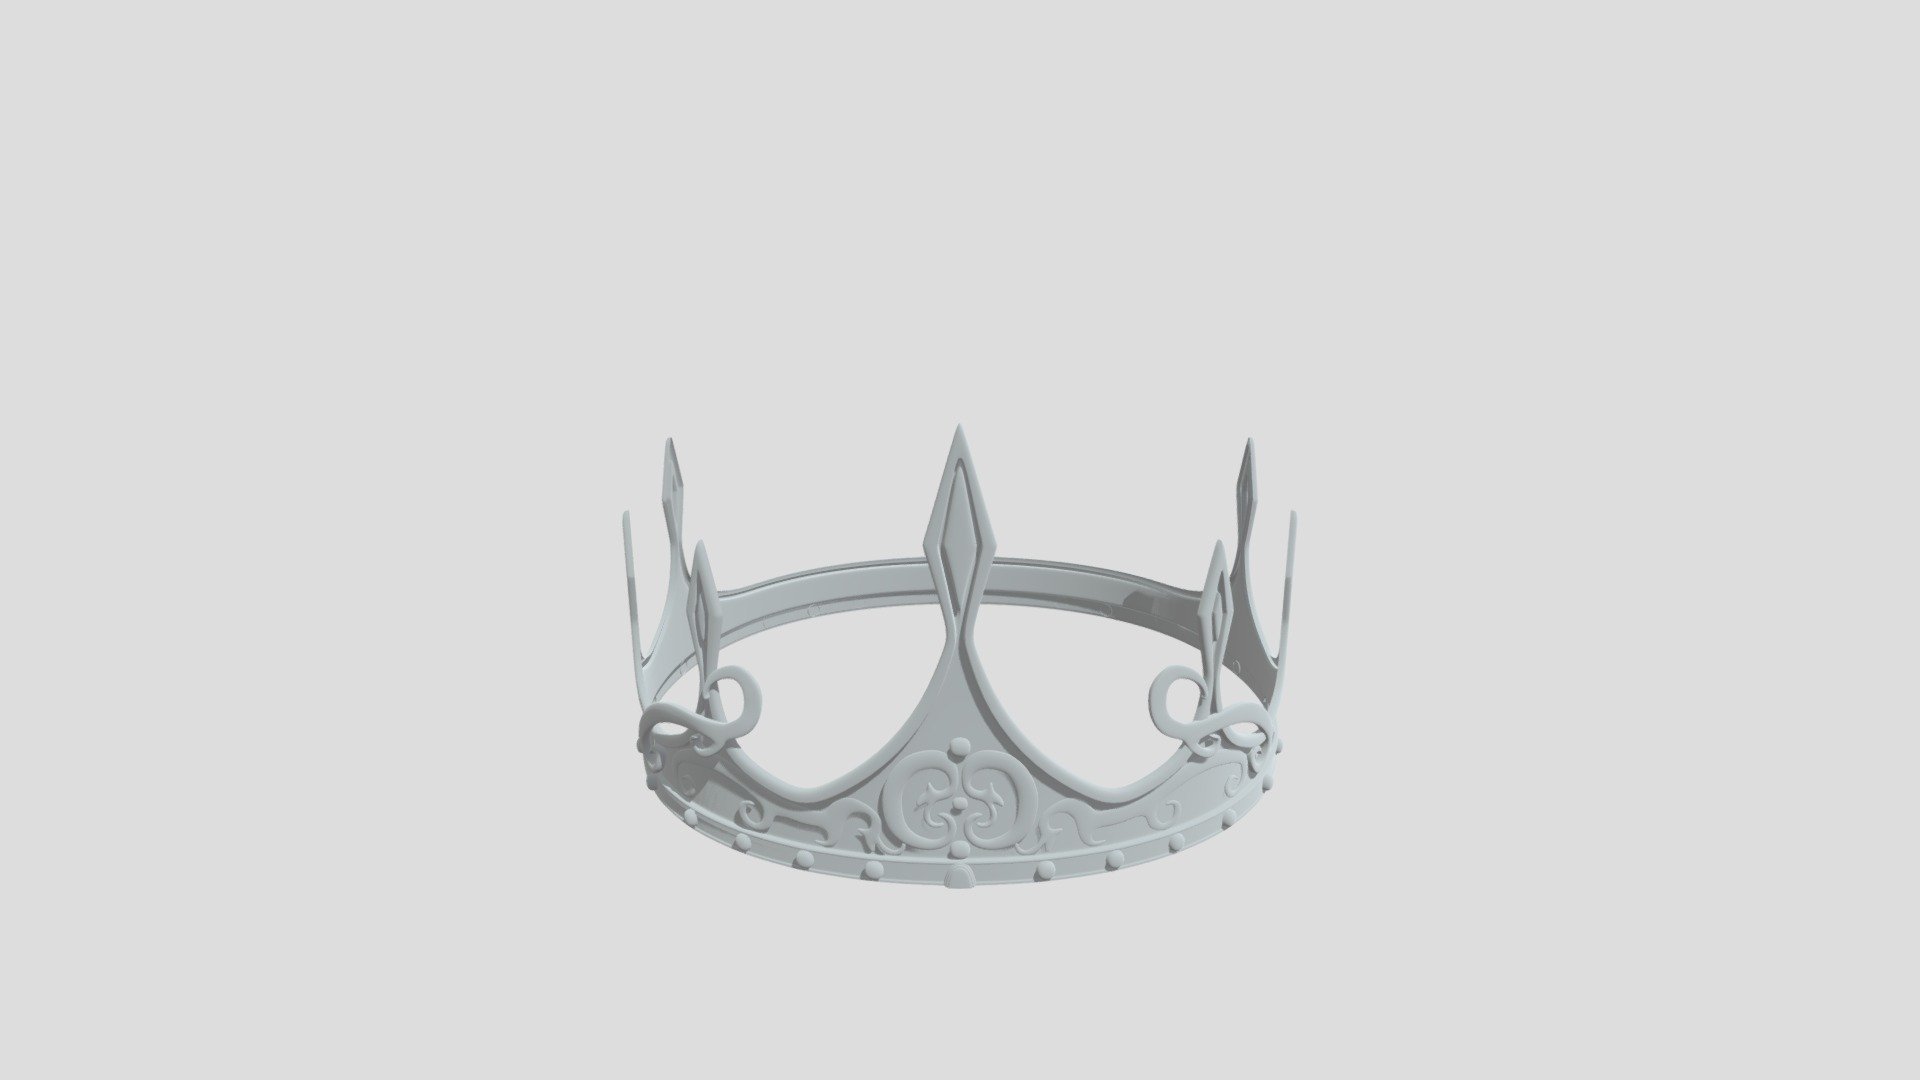 Crown .blend format, procedural textures modeled and textured totally in blender, the mesh is High poly 3d model